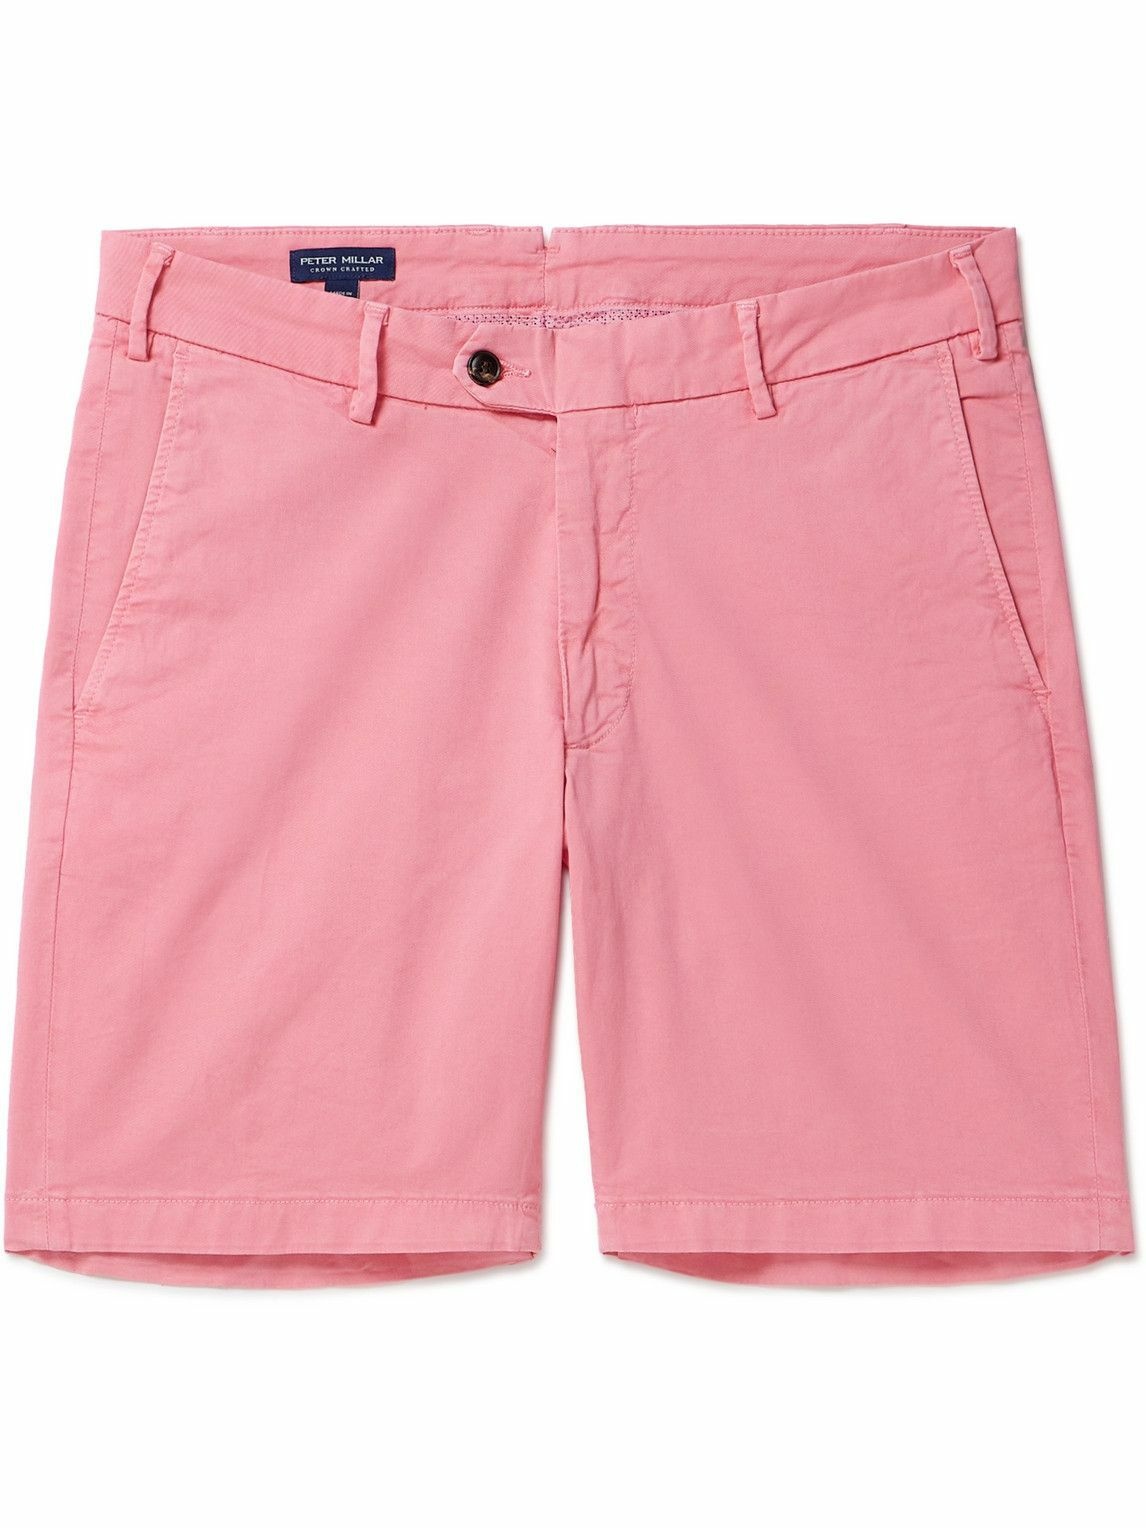 Peter Millar - Concorde Garment-Dyed Stretch-Cotton Twill Shorts - Pink ...